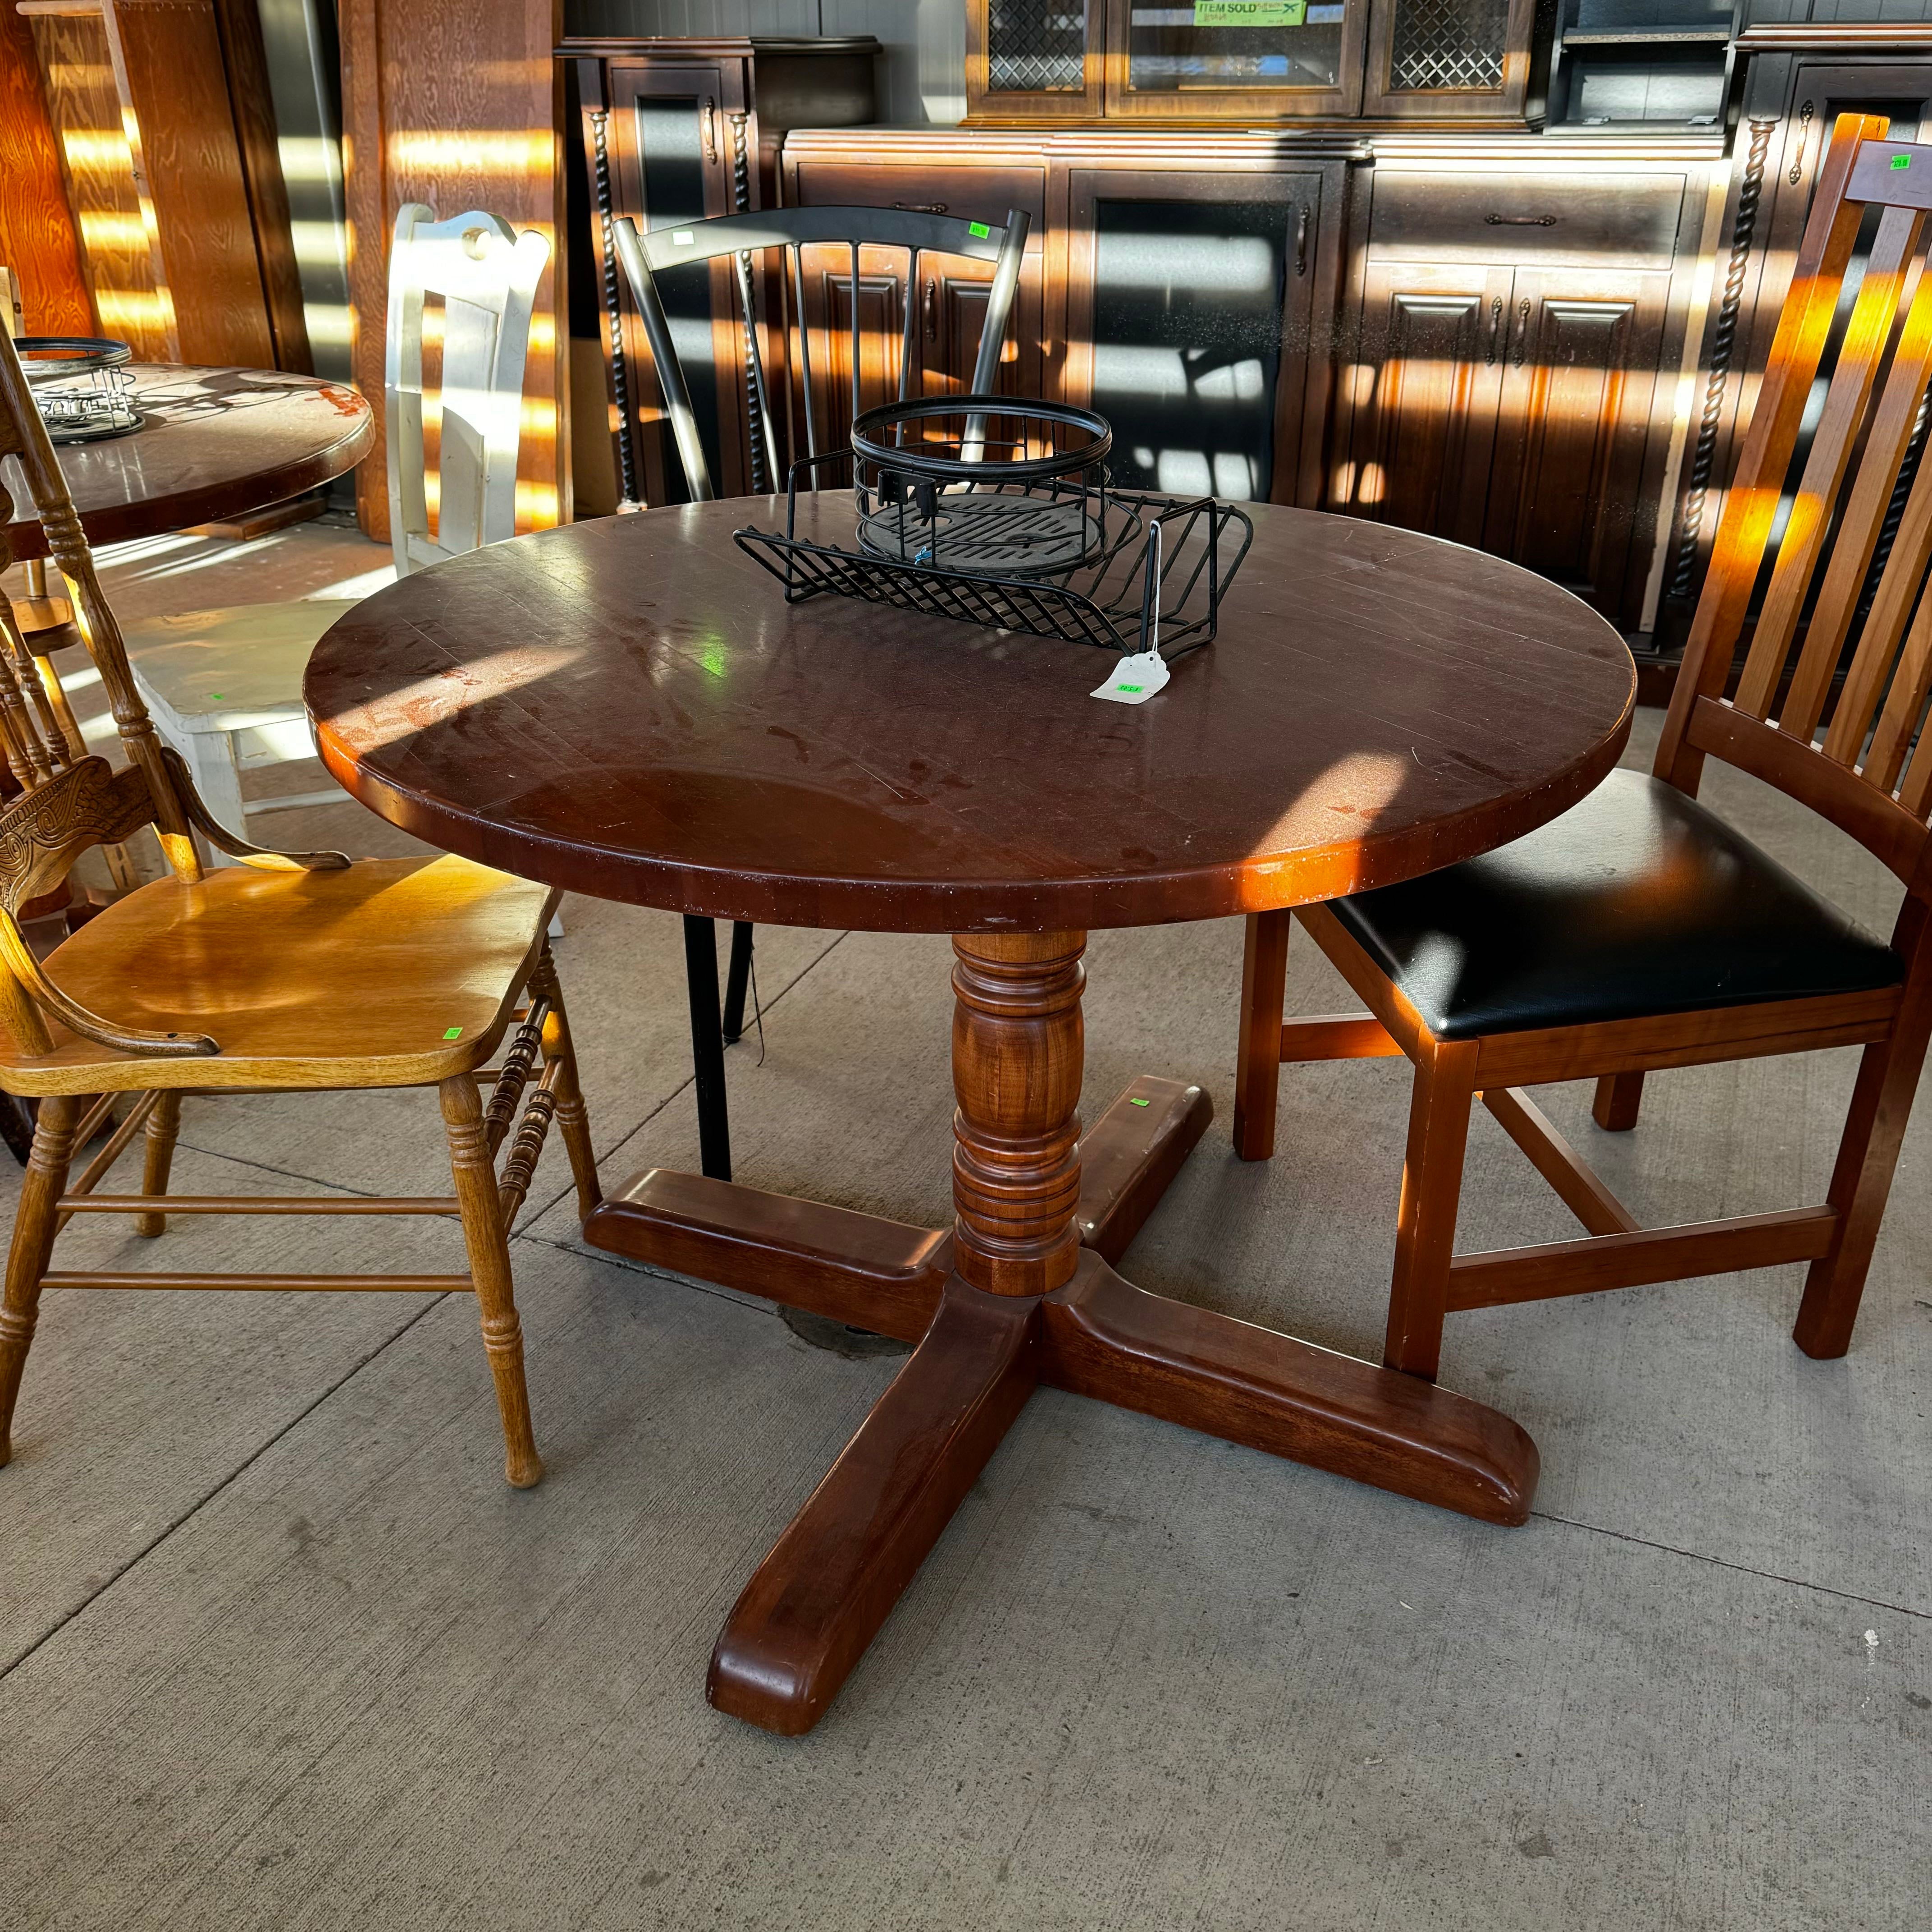 Treated Stain-Wood Top with Cast iron and Wood Base Round Dining Table